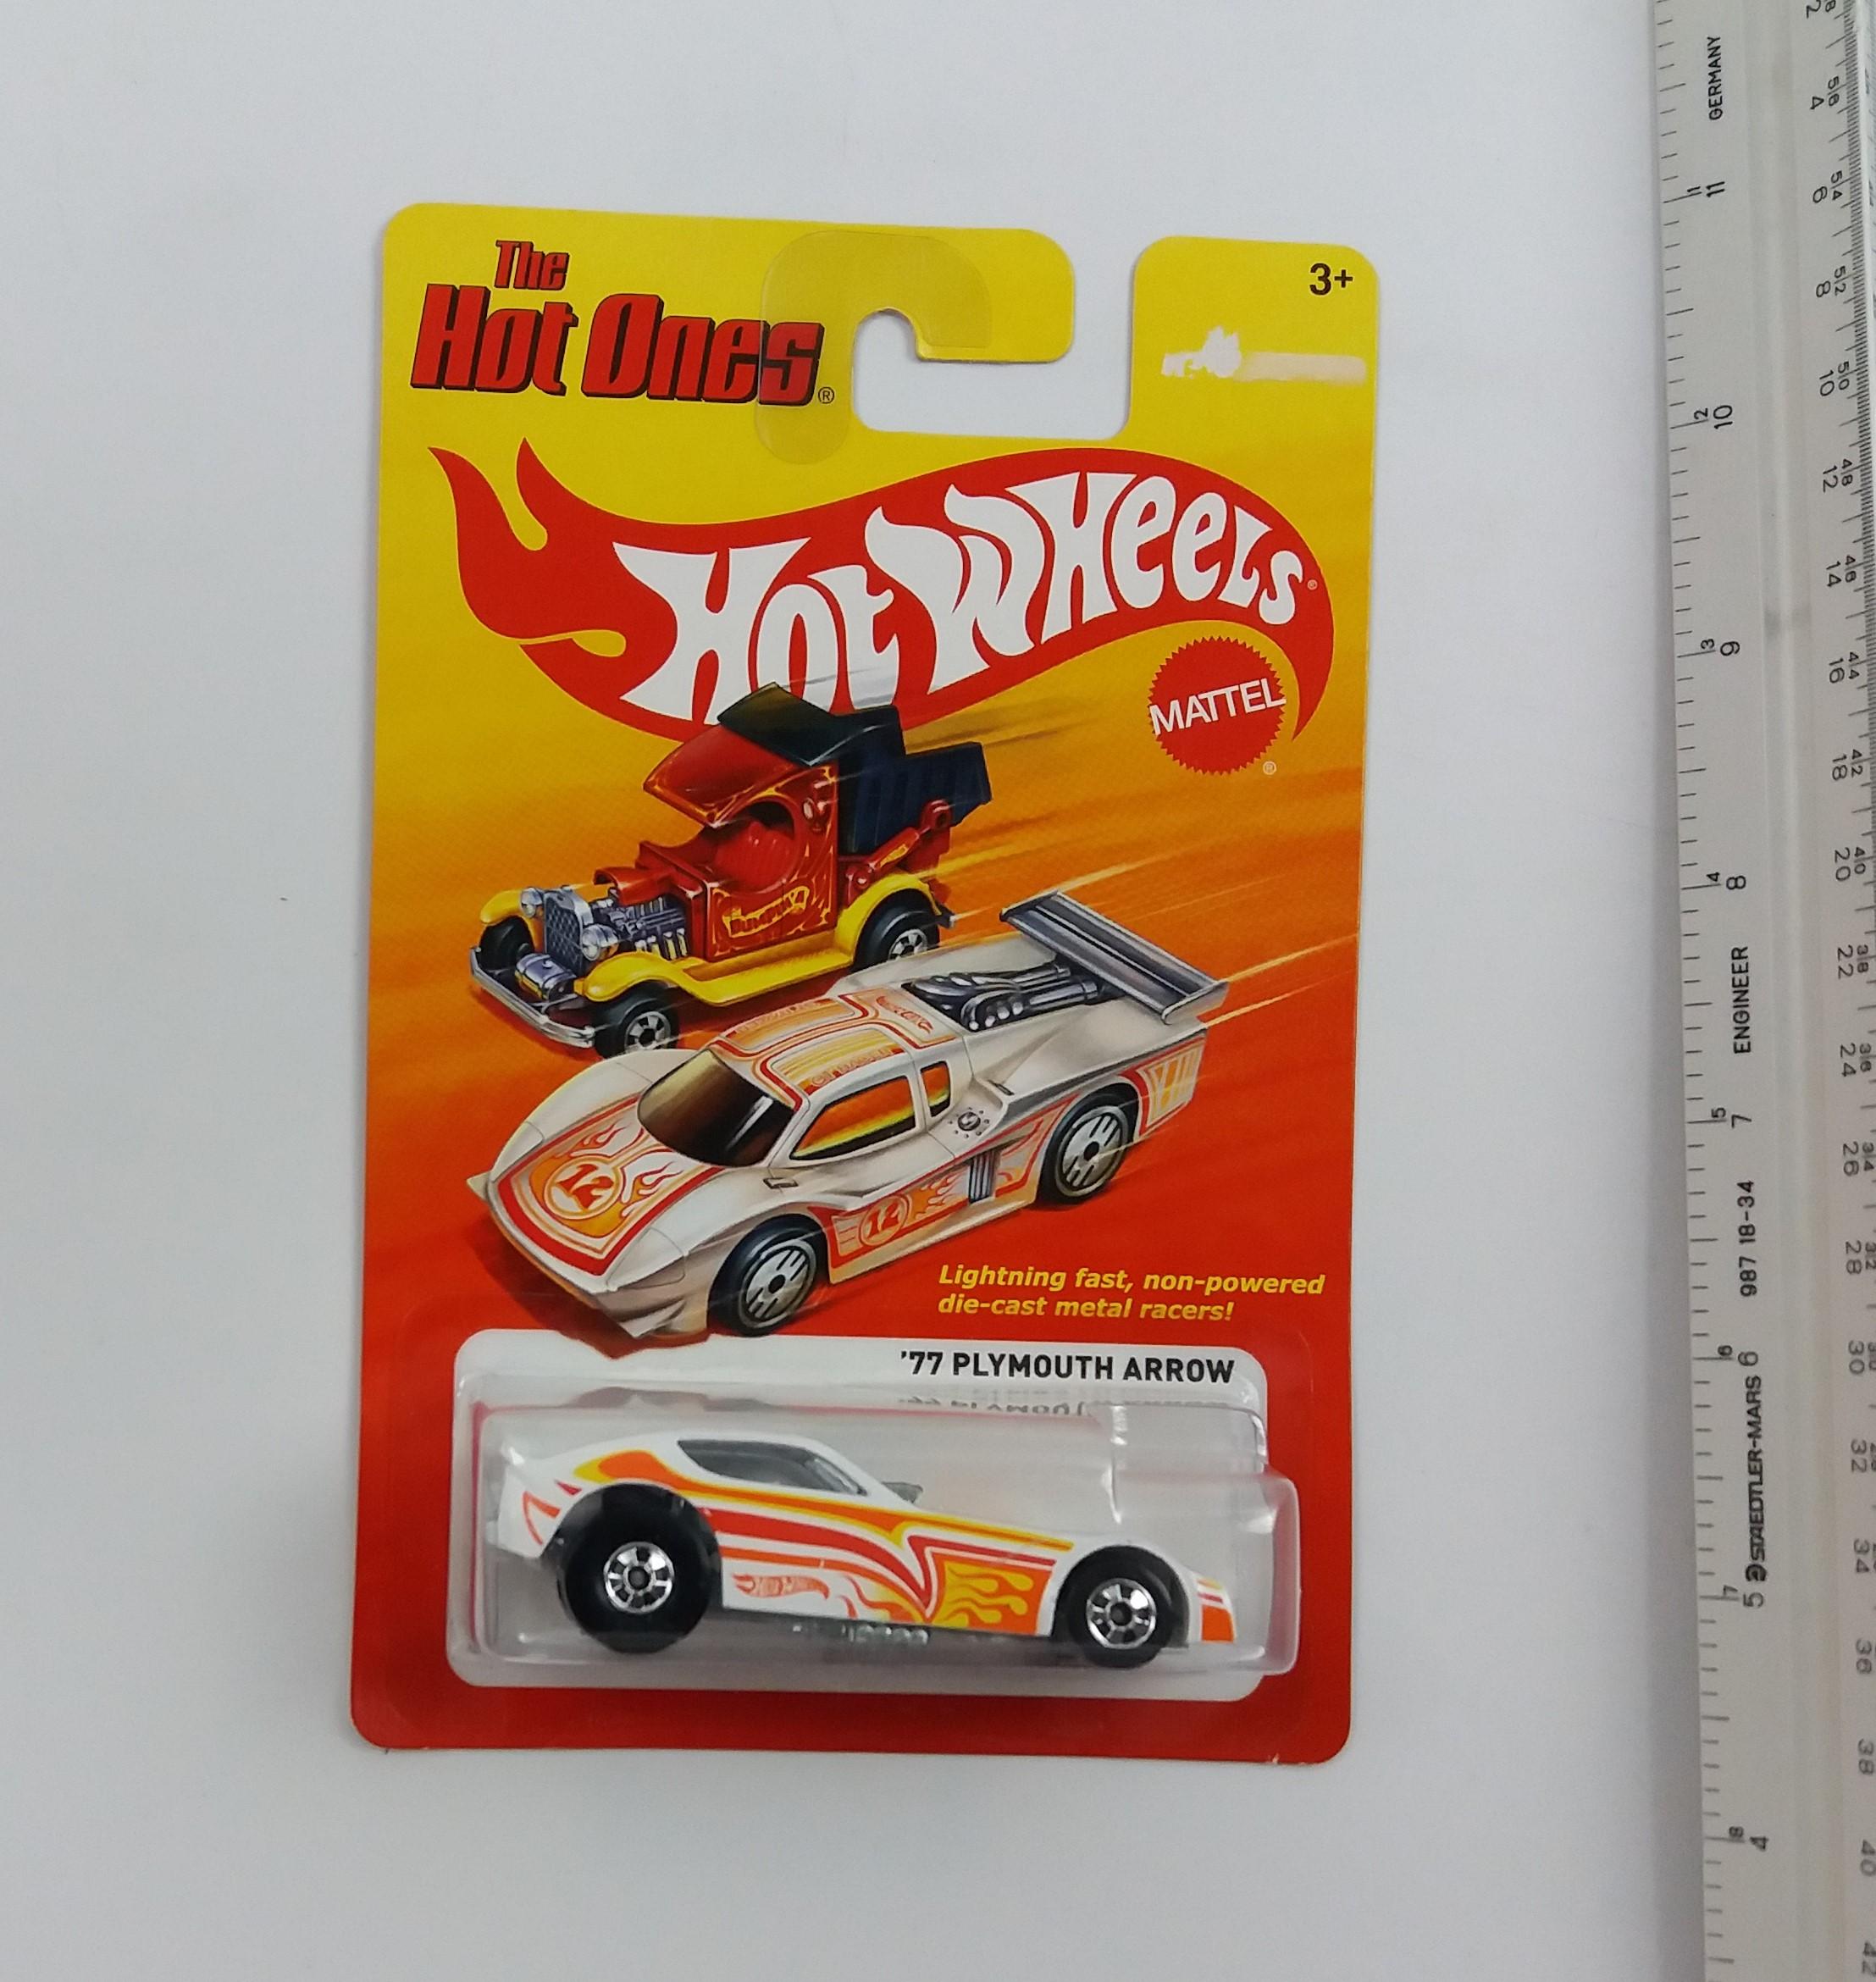 2011 '77 Plymouth Arrow Hot Wheels The Hot Ones Collectible Diecast Car